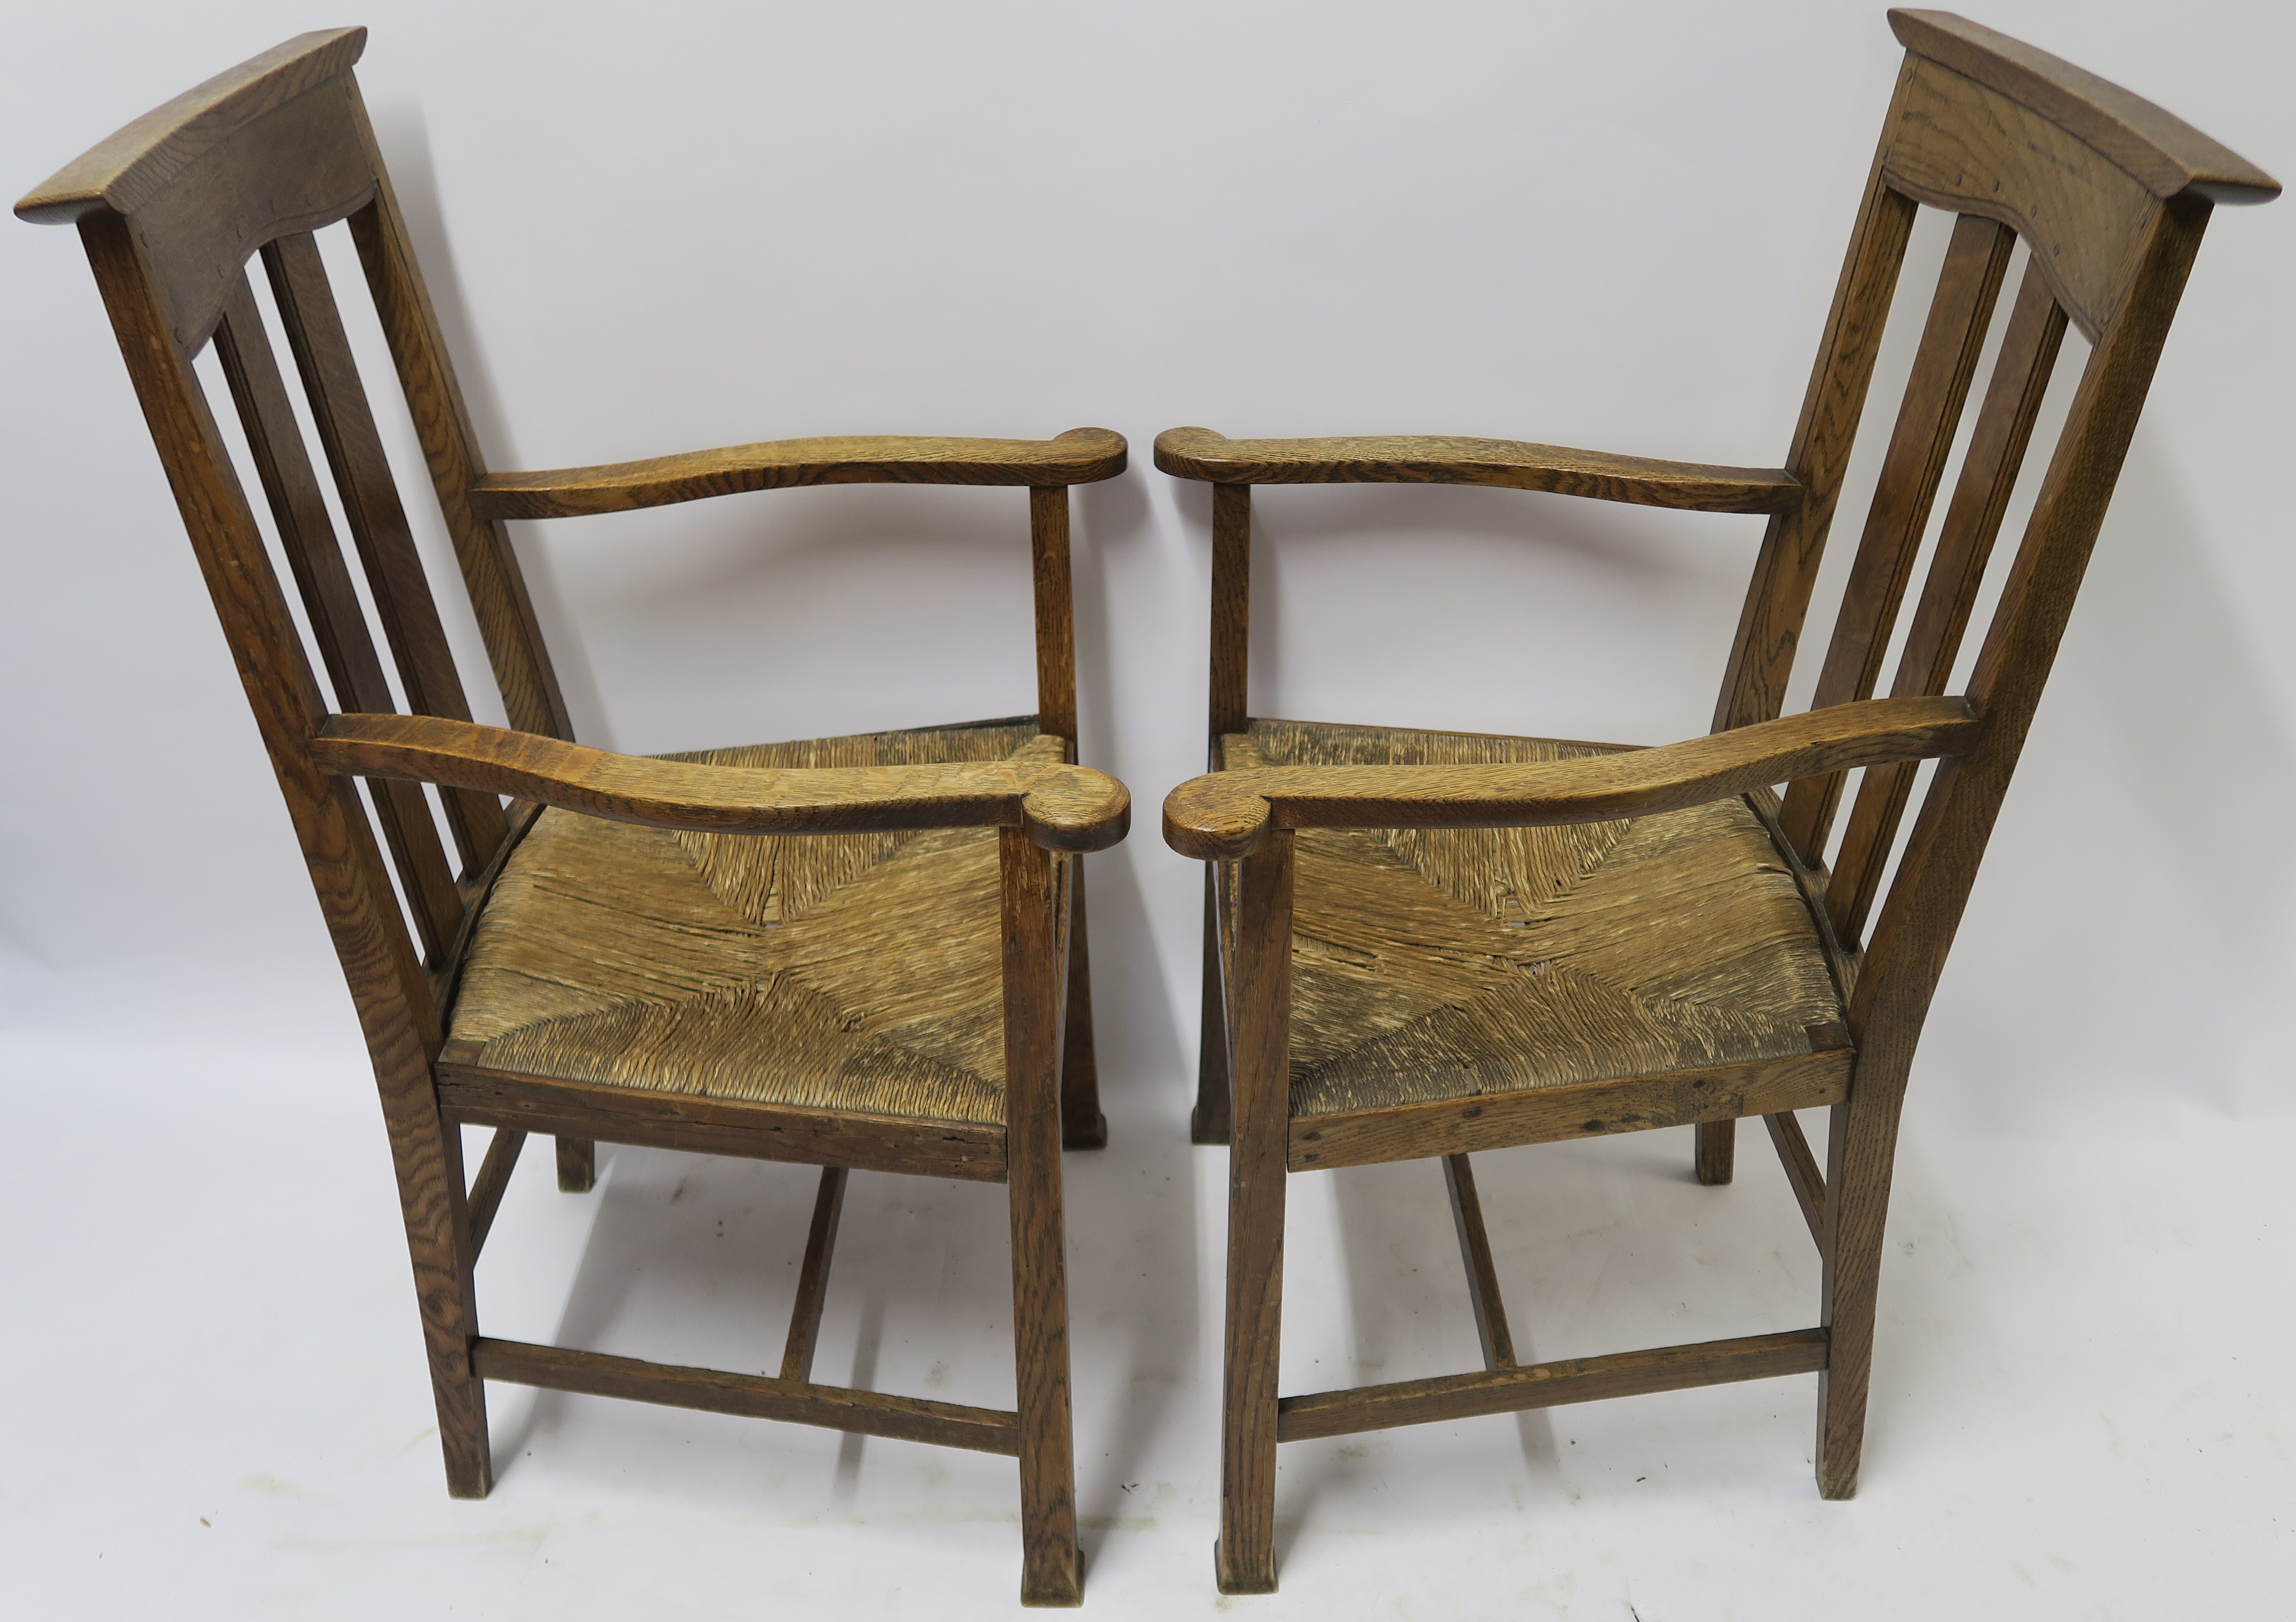 A SET OF SIX ARTS AND CRAFTS DINING CHAIRS WITH RUSH SEATS 103cm and 100cm high and two other chairs - Image 6 of 22